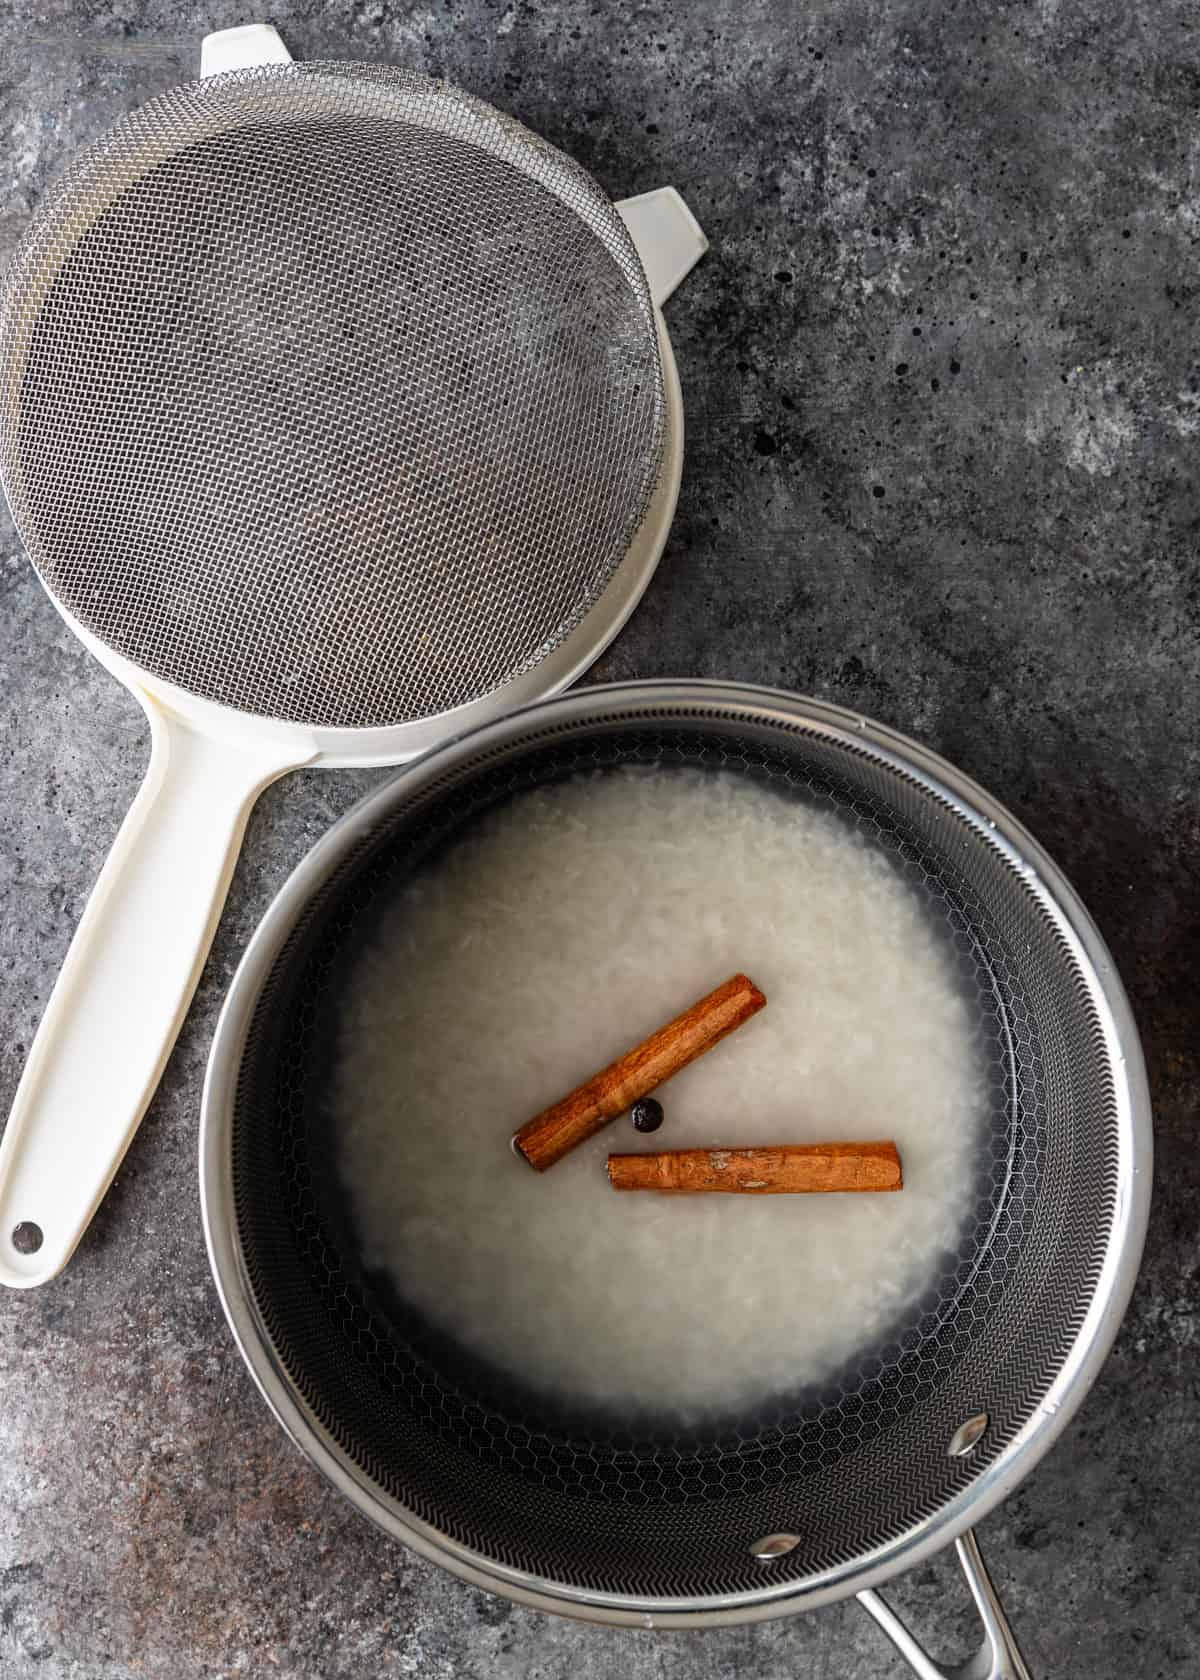 overhead: making the rice in a small saucepan with cinnamon sticks. There is a small strainer visible